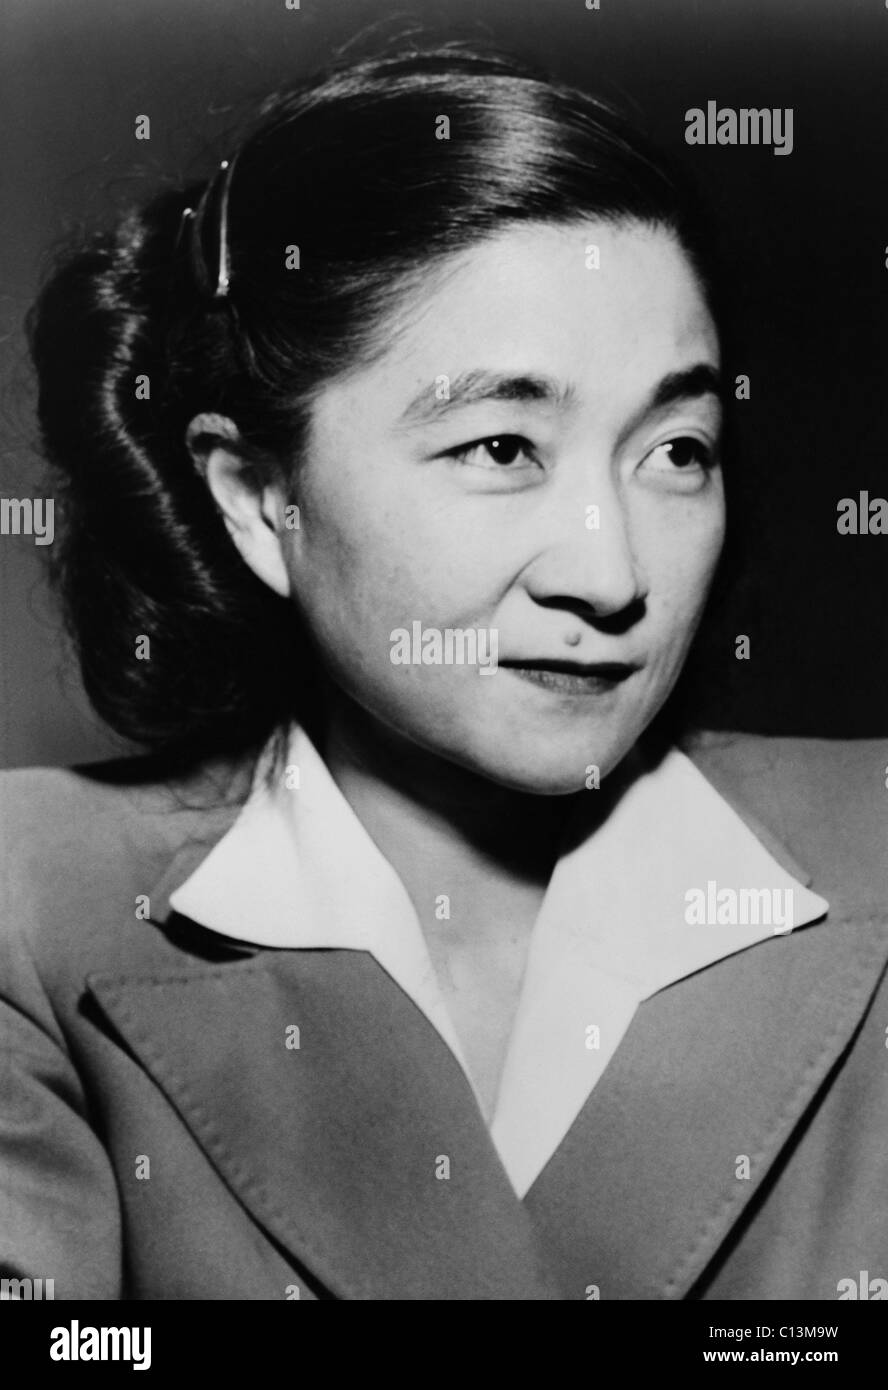 Iva Ikuko Toguri D'Aquino 1916-2006 in 1949 at the time of her trial for treason for allegedly participating in 'Tokjo Rose' broadcasts during World War II. Toguri was convicted with perjured testimony and spent six years in prison. She was officially Stock Photo